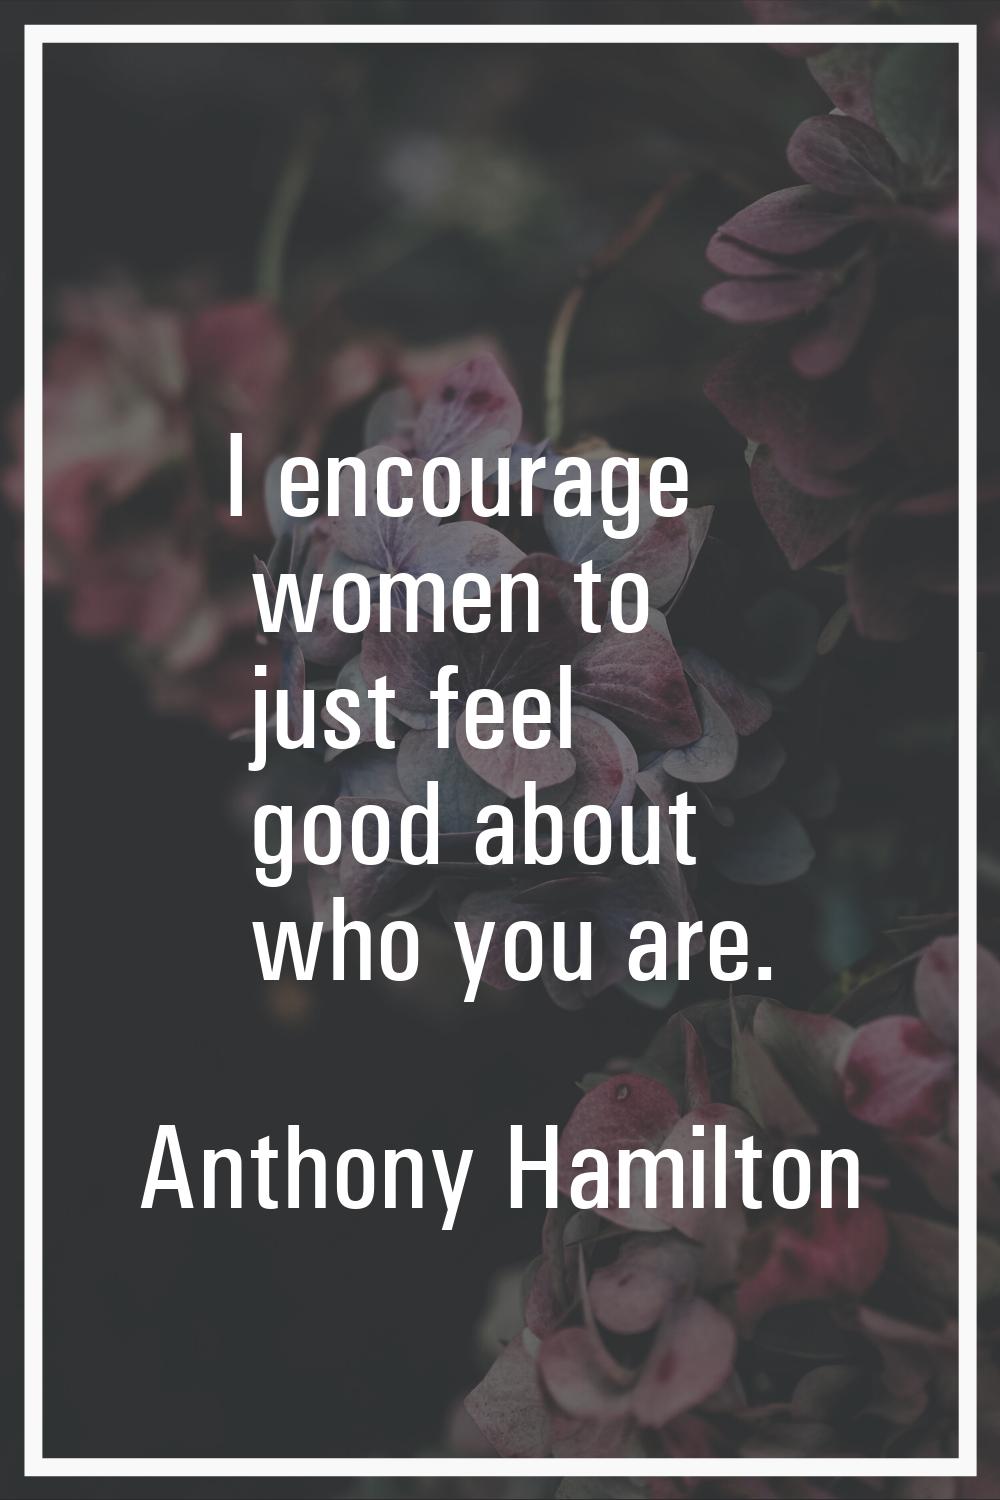 I encourage women to just feel good about who you are.